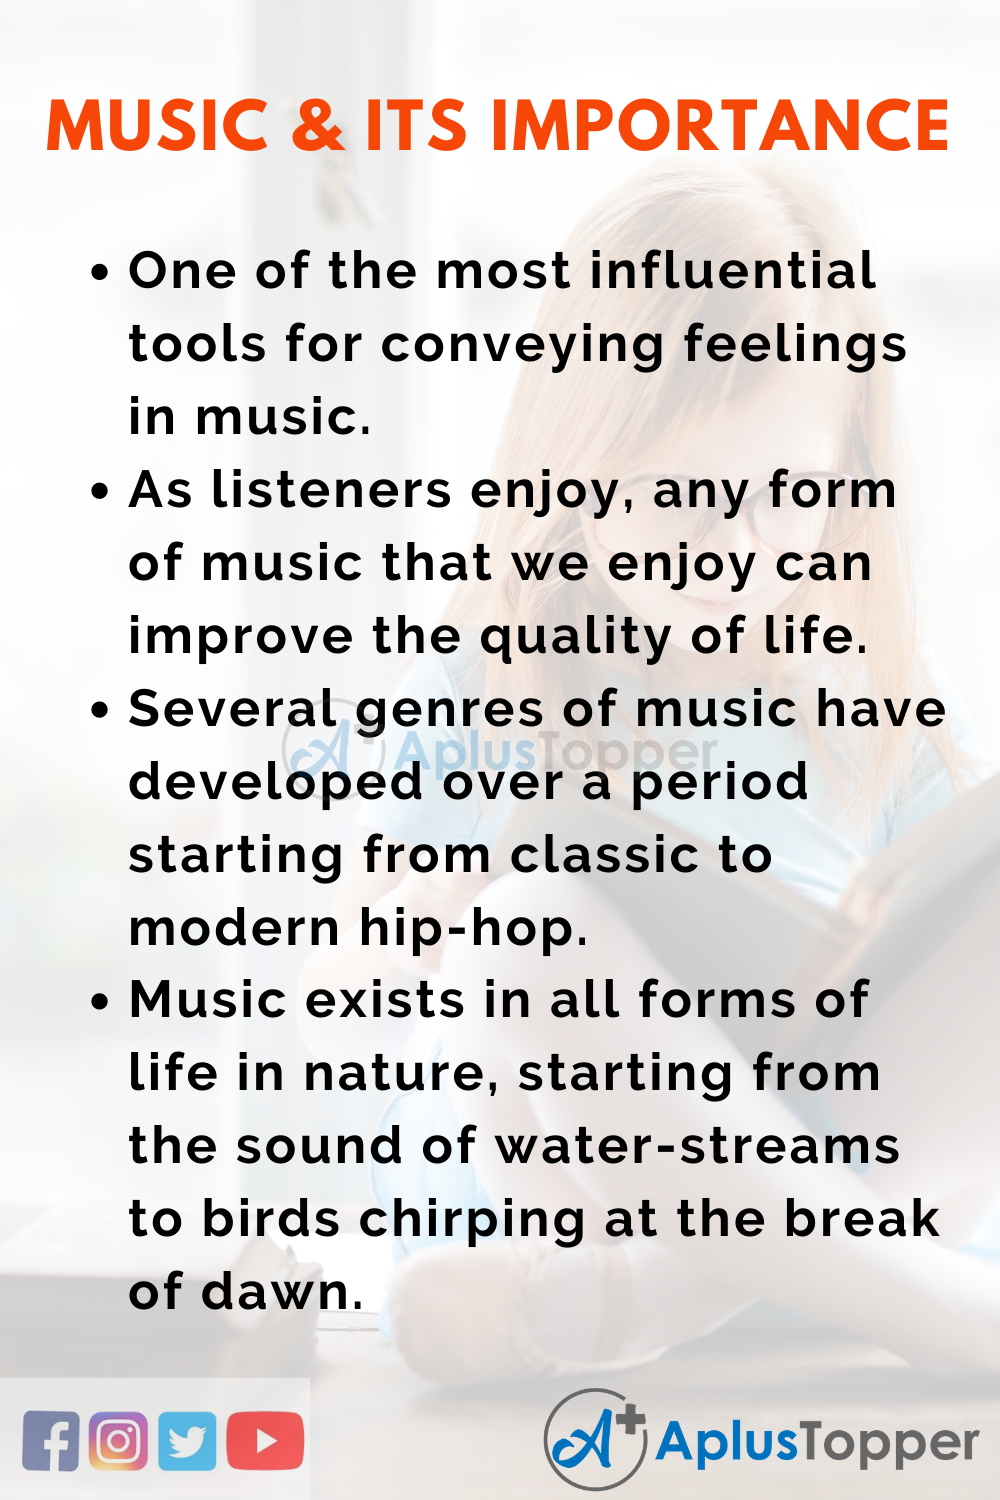 importance of music